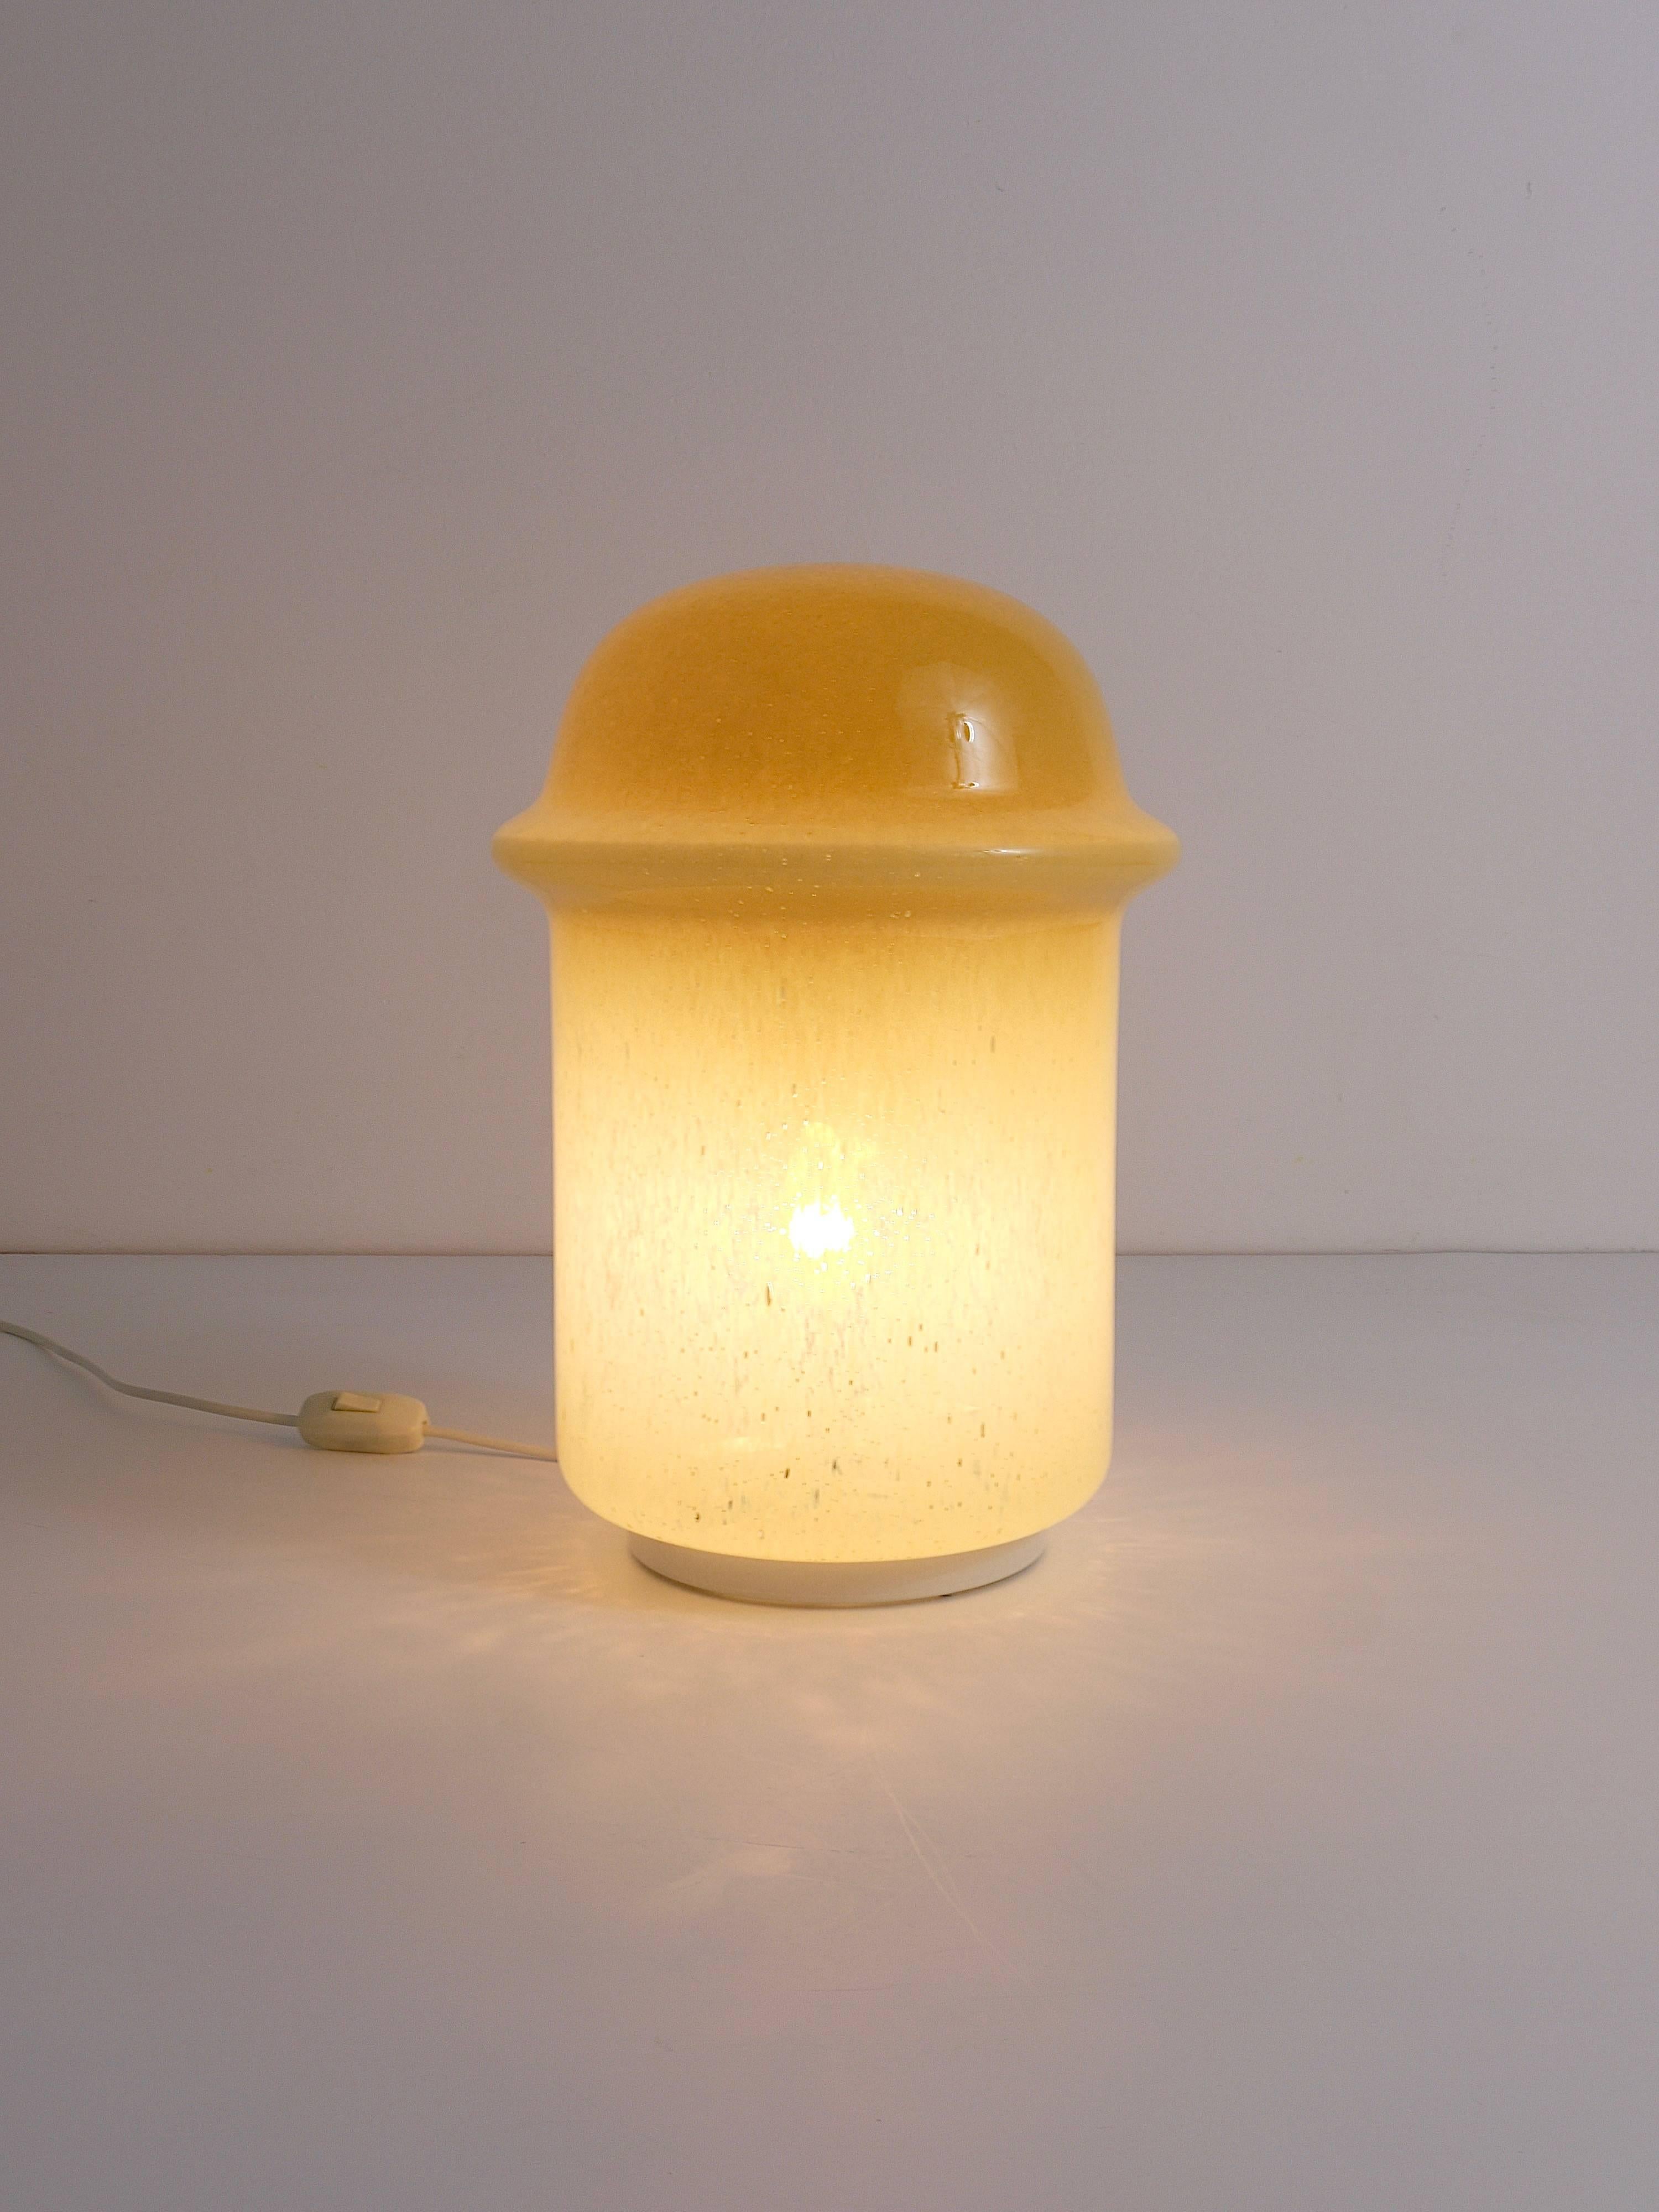 A wonderful modernist mushroom table or side lamp, featuring a handblown art glass lampshade in beige / amber, adorned with nice bubbles within the glass. Crafted in the 1960s, this lamp is in very good condition and evokes the style of Carlo Nason